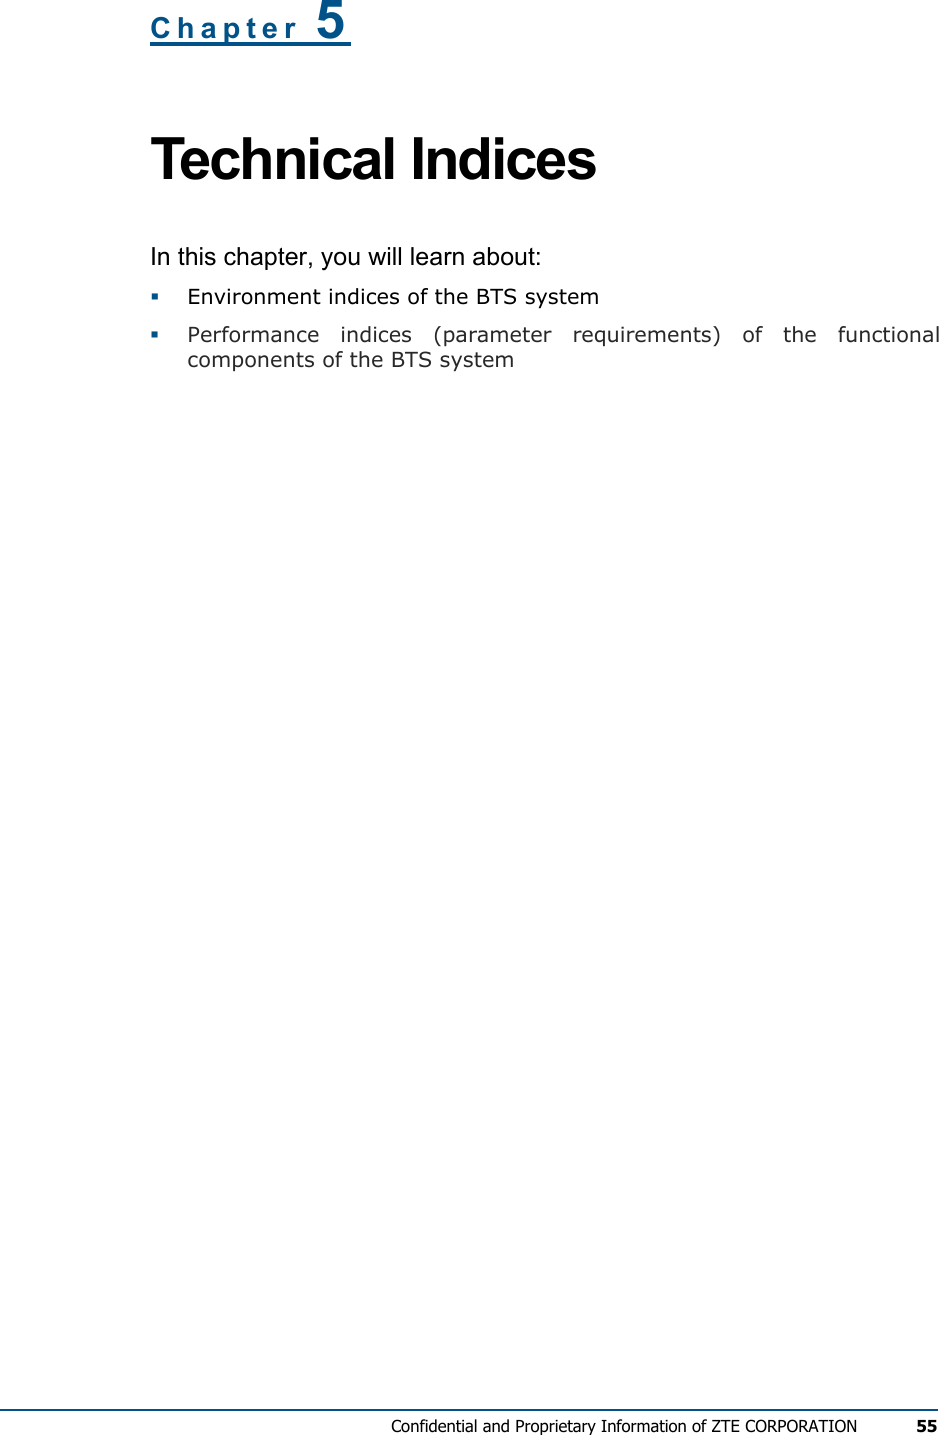  Confidential and Proprietary Information of ZTE CORPORATION 55 Chapter 5 Technical Indices In this chapter, you will learn about:   Environment indices of the BTS system   Performance indices (parameter requirements) of the functional components of the BTS system 